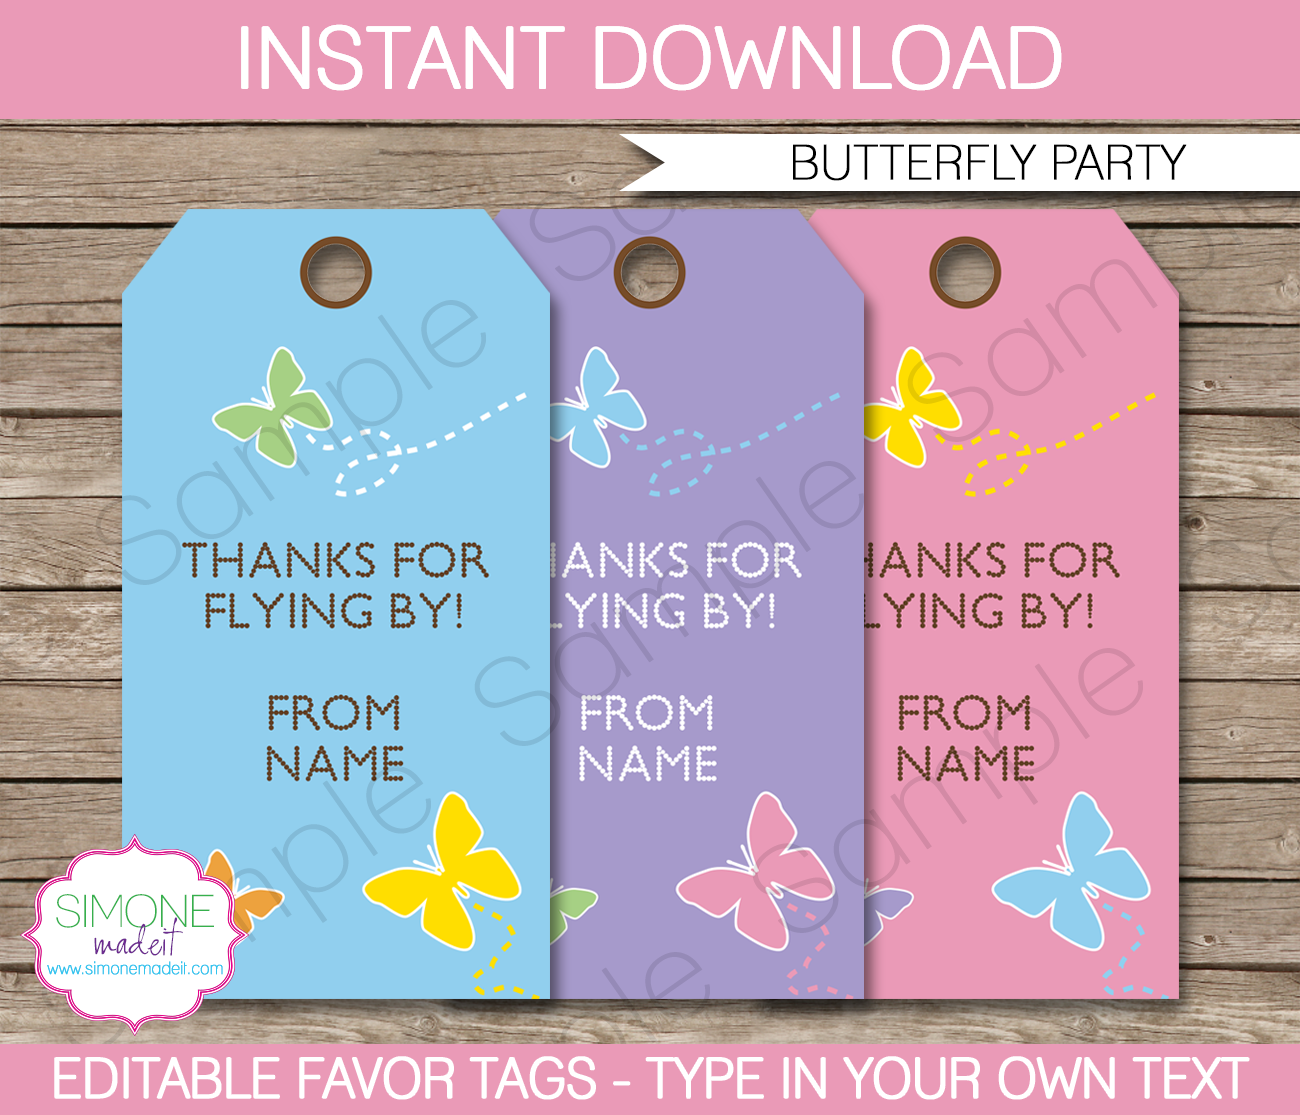 Butterfly Party Favor Tags | Thank You Tags | Birthday Party | Editable DIY Template | $3.00 INSTANT DOWNLOAD via SIMONEmadeit.com